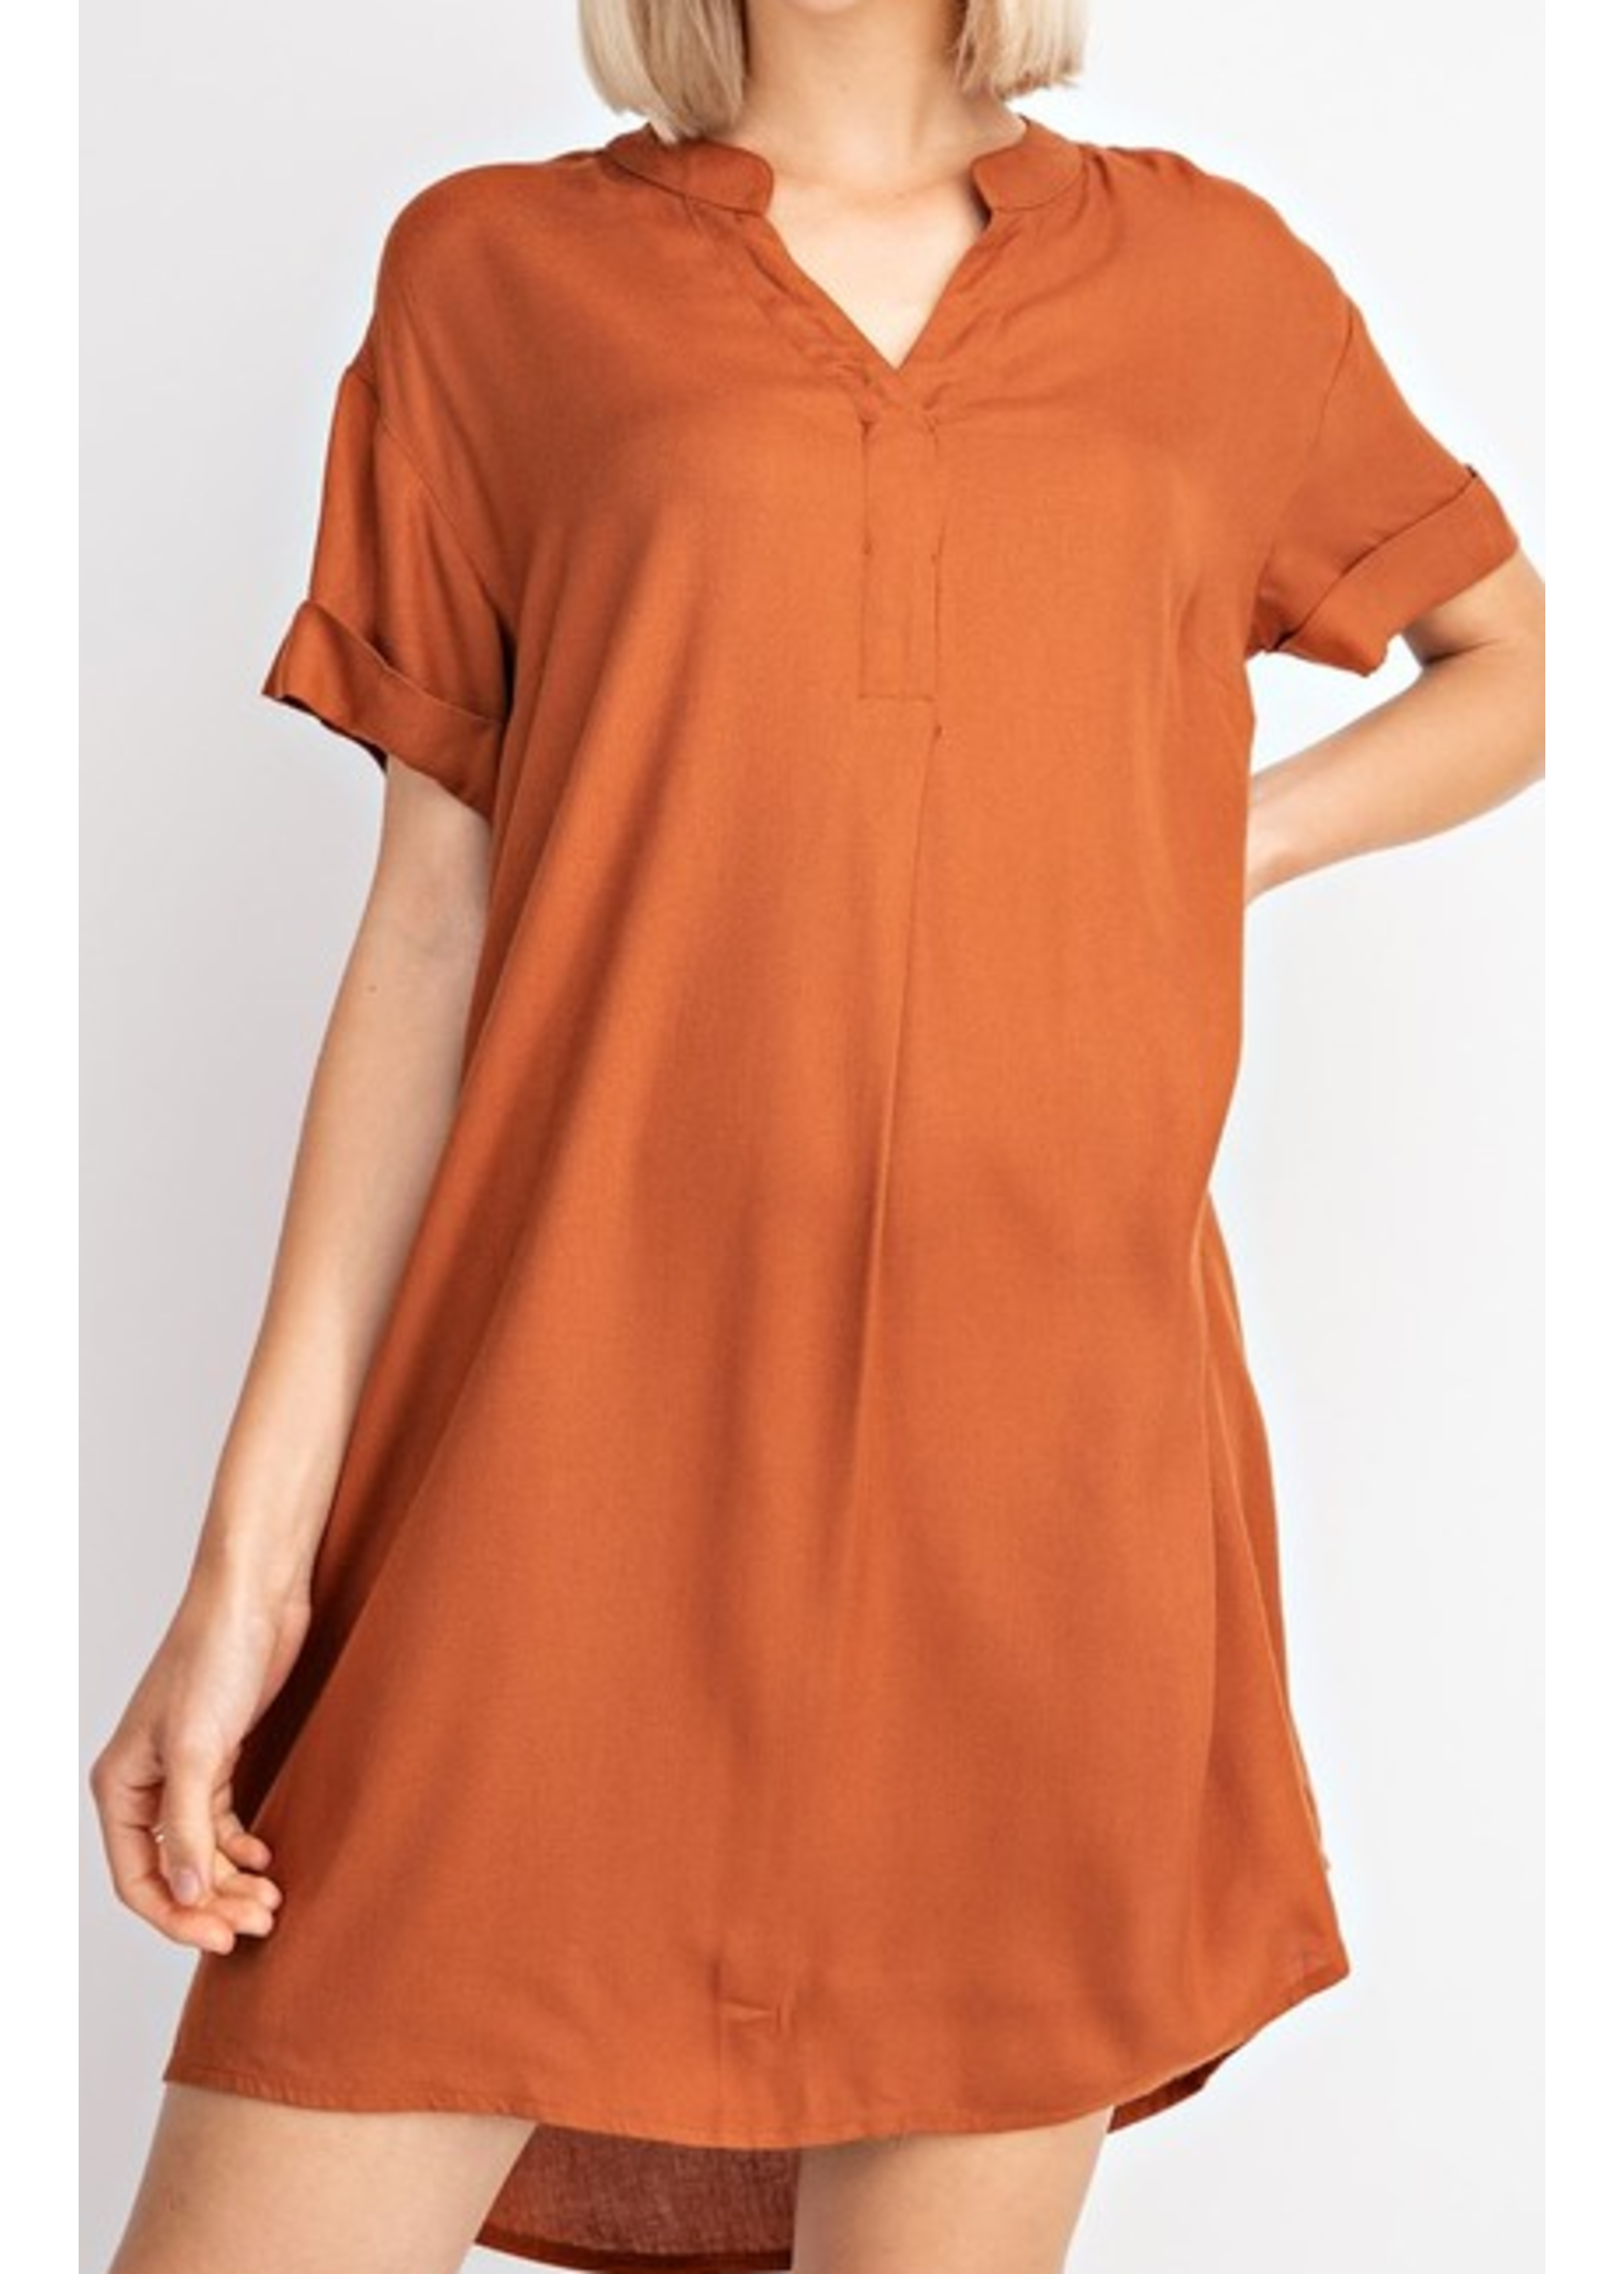 HNHD1008 - VNECK PLEATED FRONT